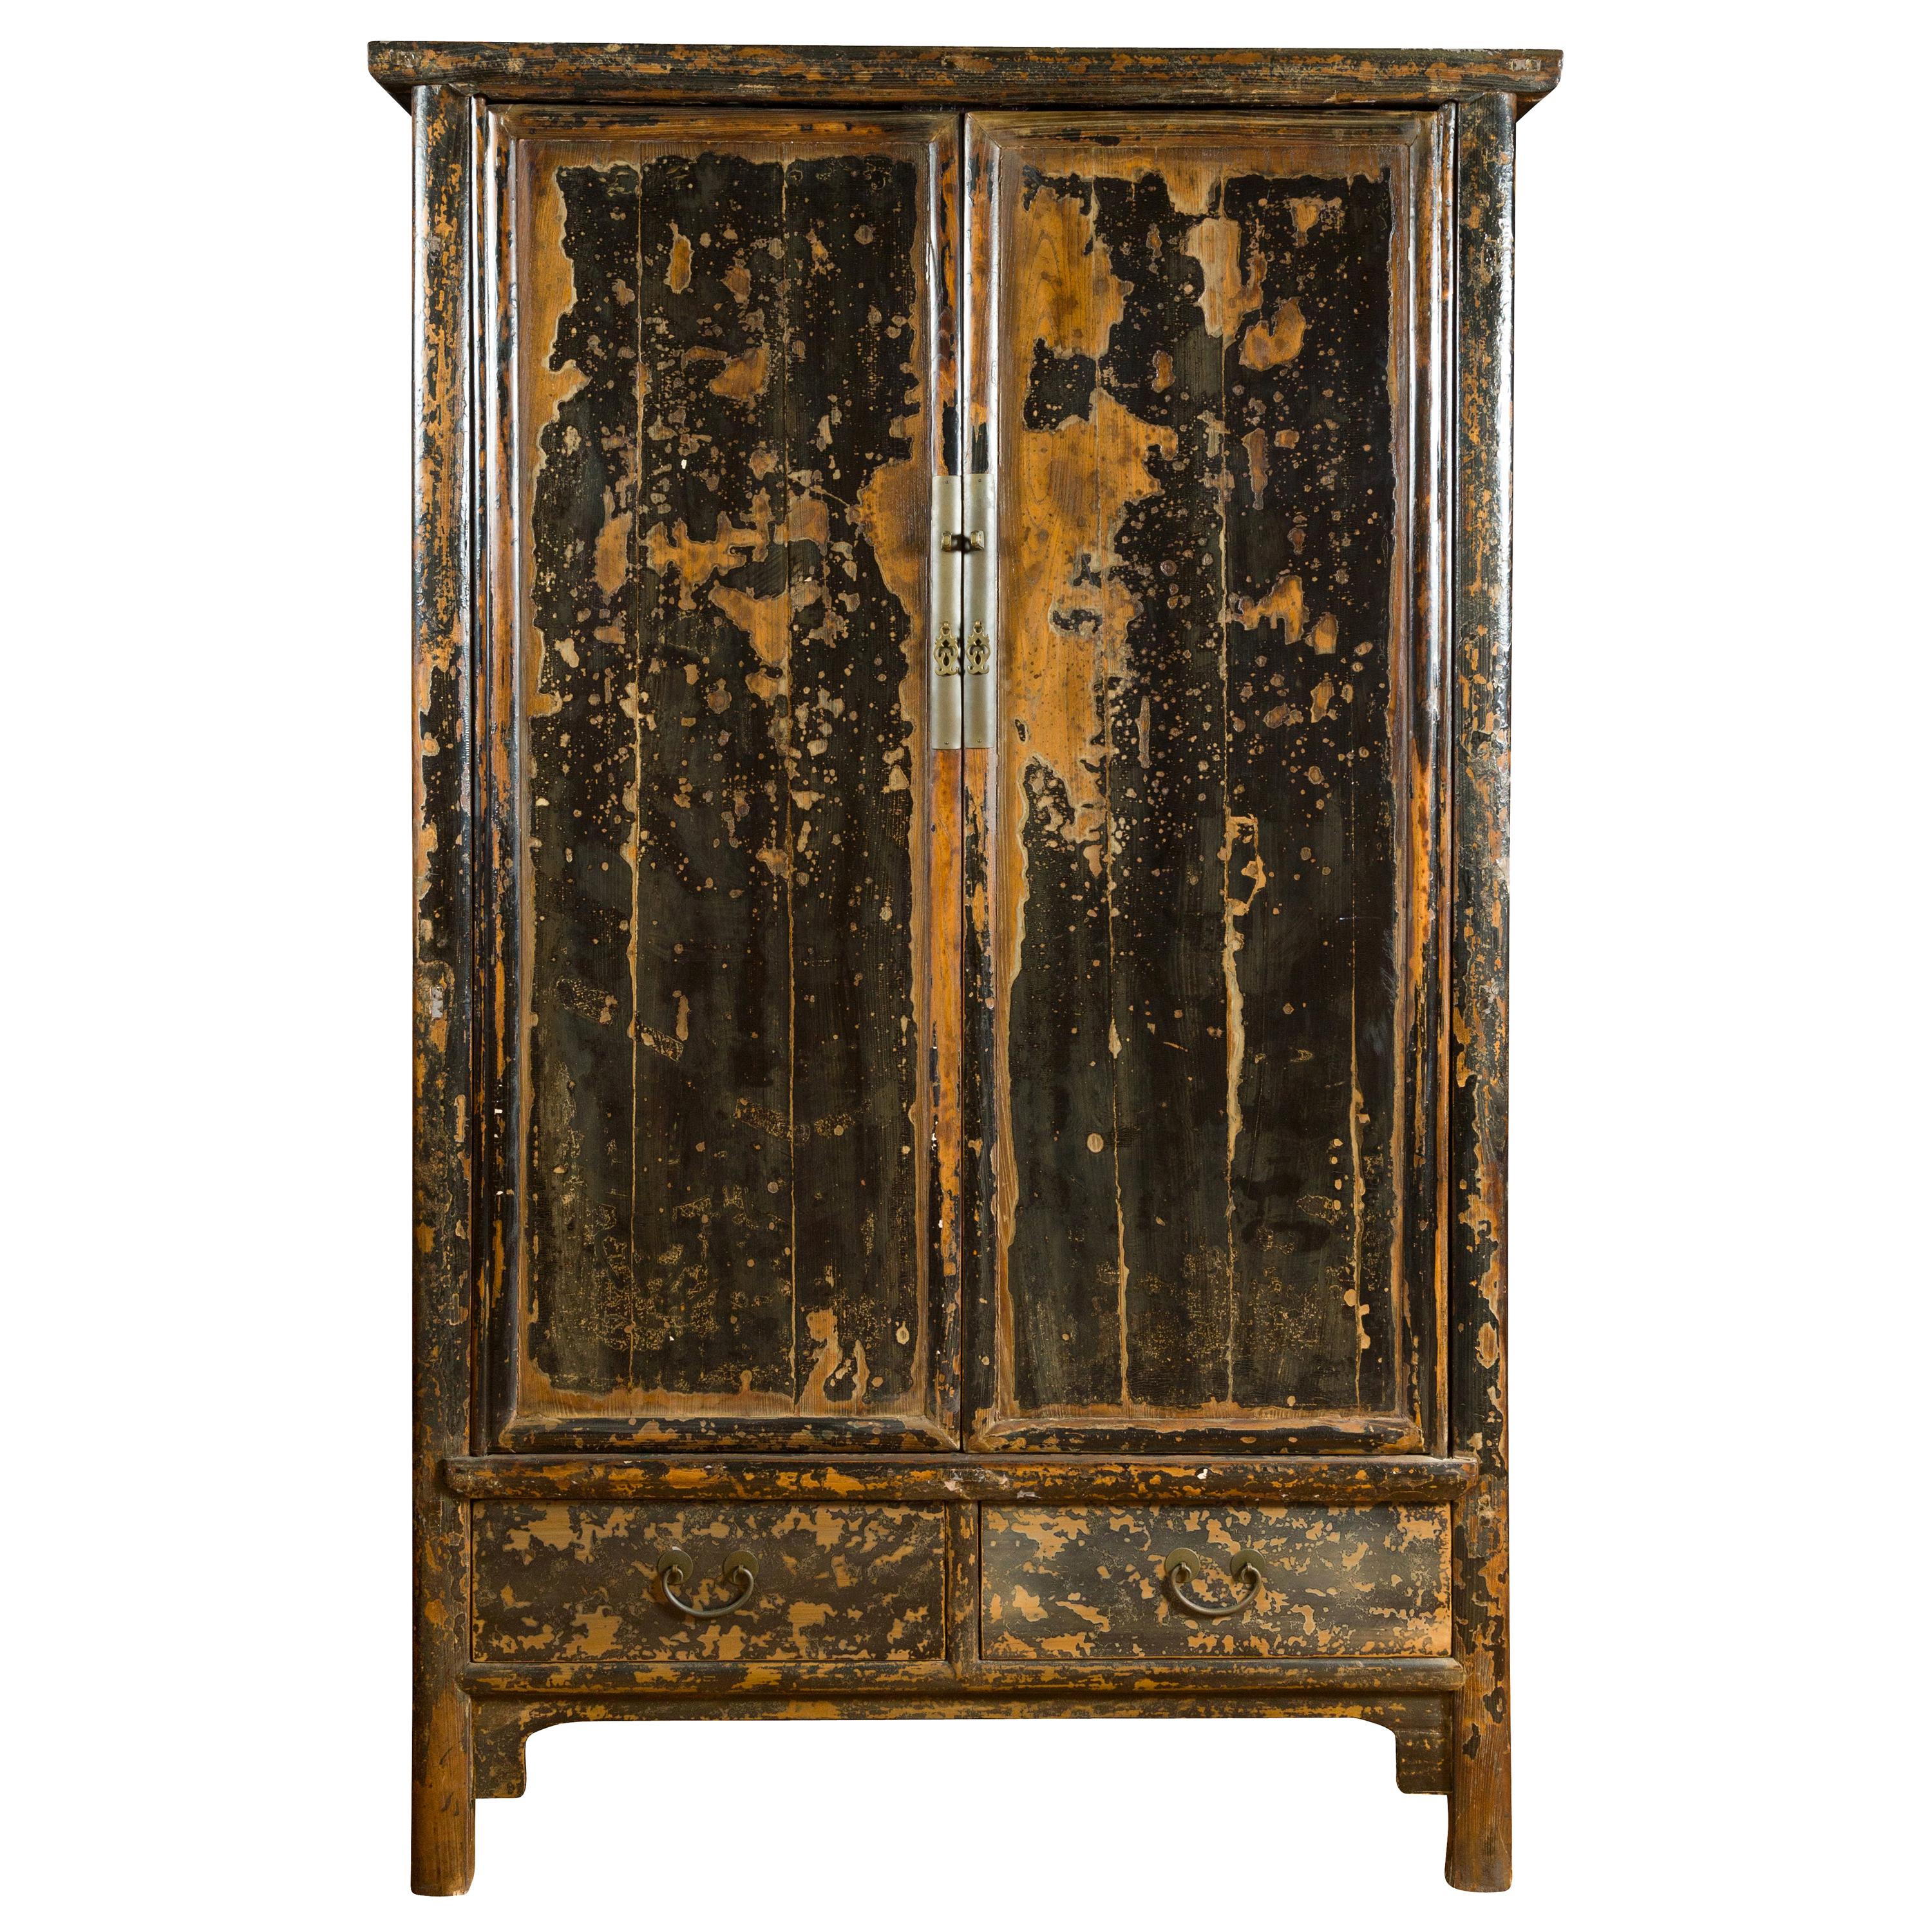 Qing Dynasty 19th Century Distressed Black Lacquer Cabinet with Original Finish For Sale